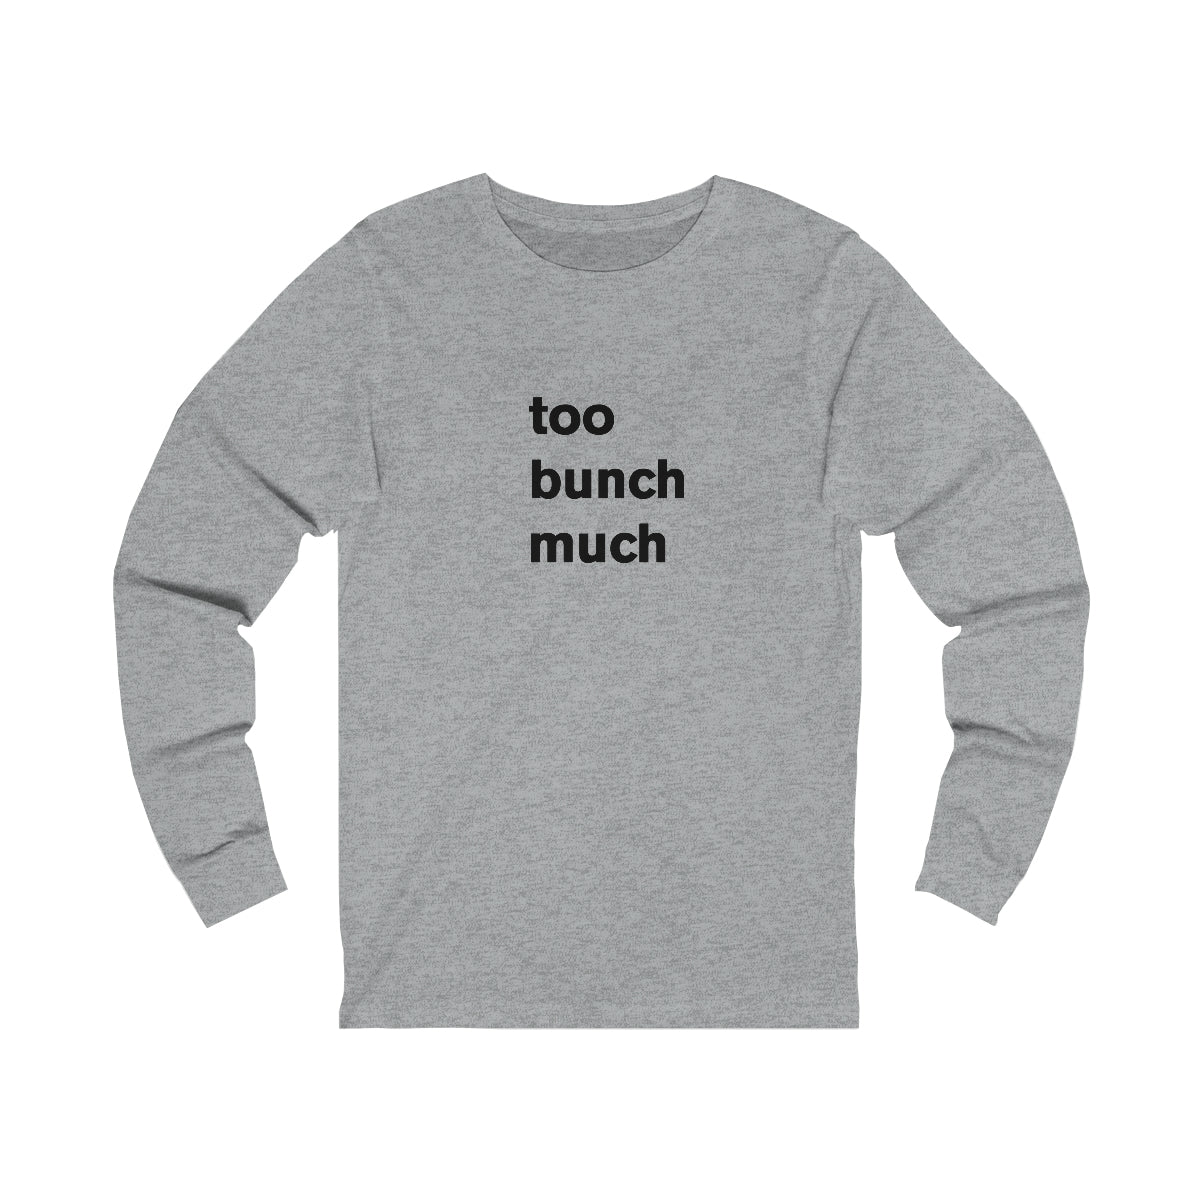 too bunch much - long sleeve